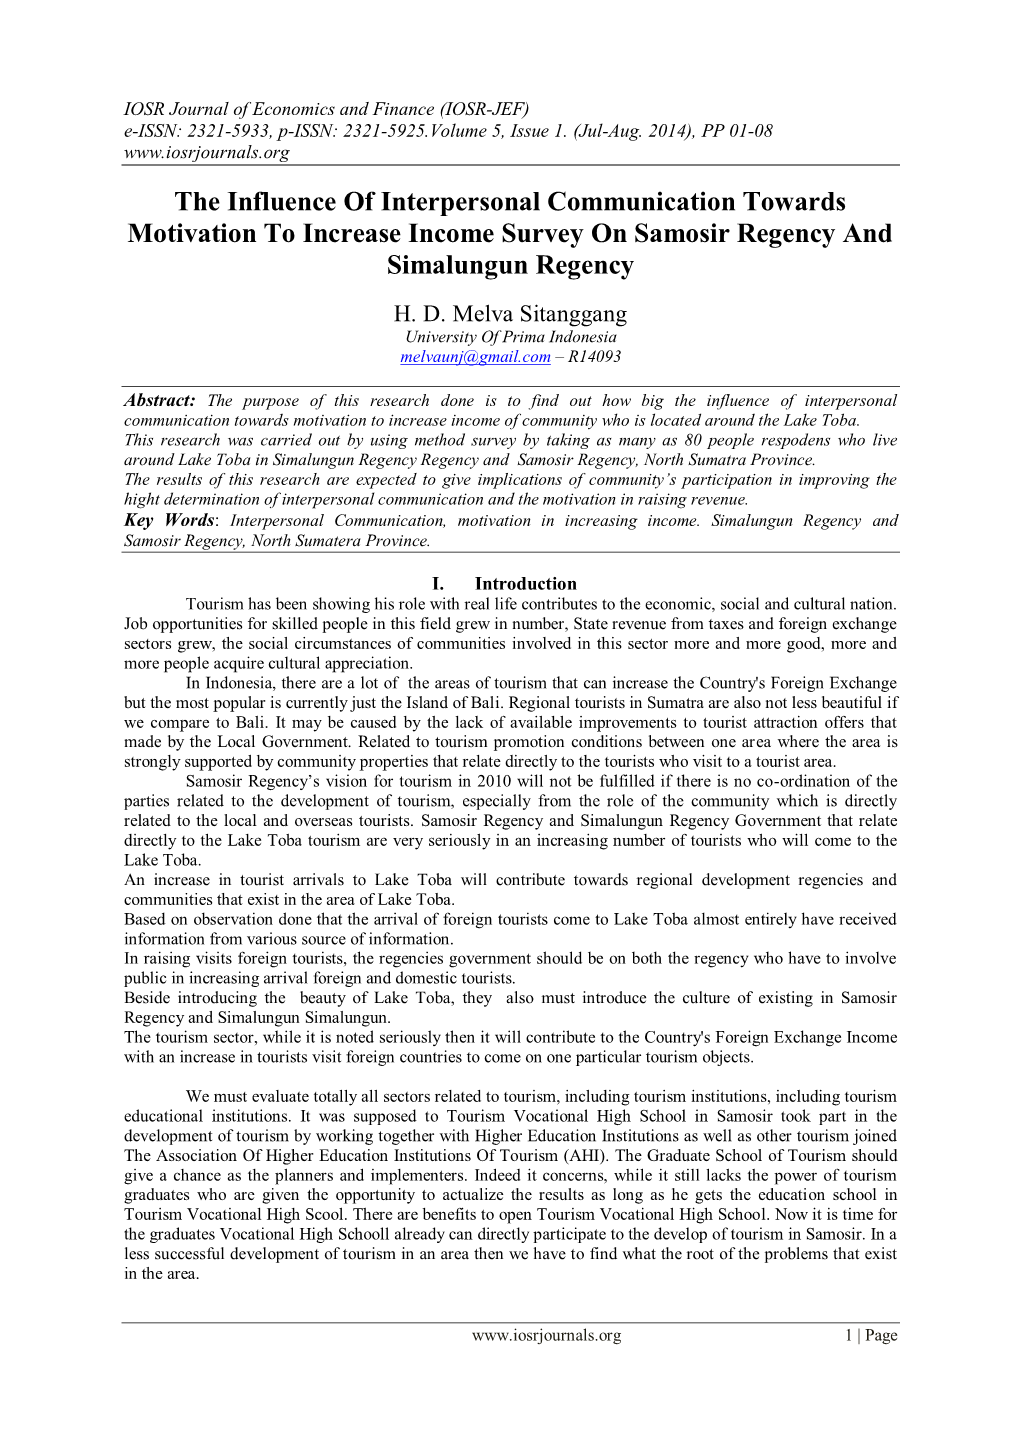 The Influence of Interpersonal Communication Towards Motivation to Increase Income Survey on Samosir Regency and Simalungun Regency